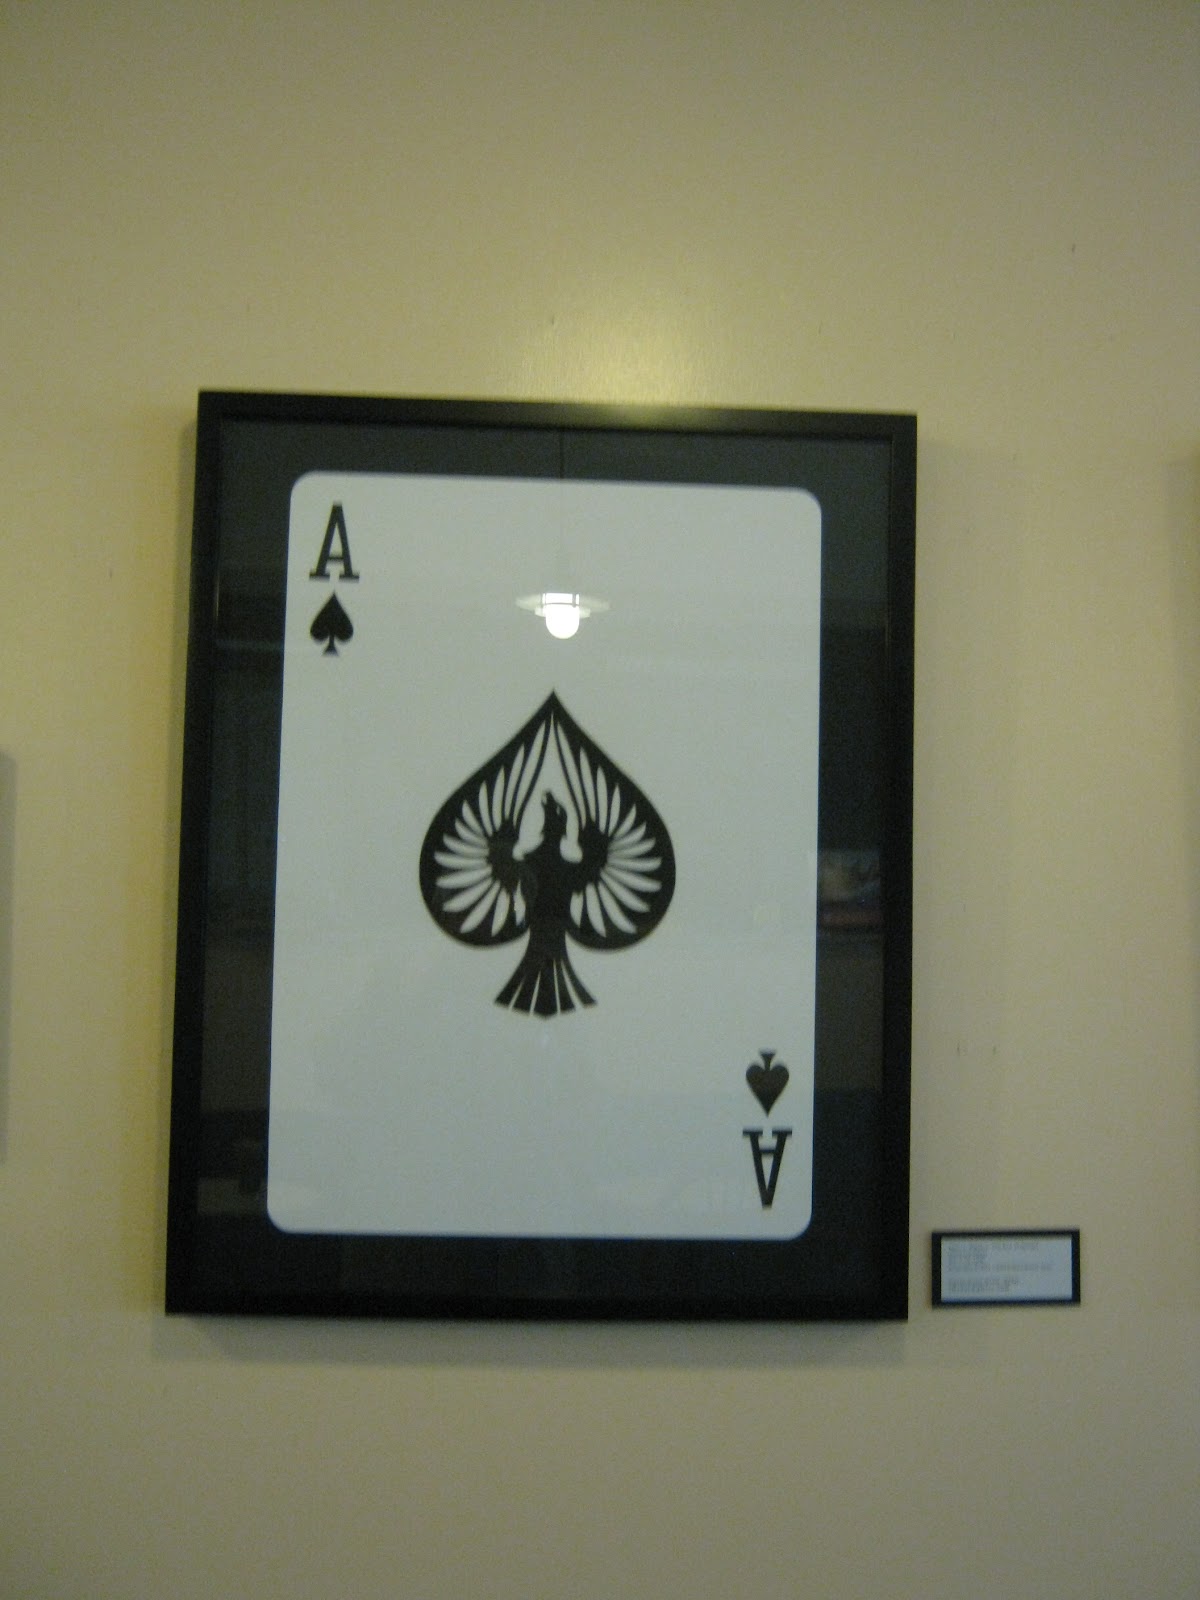 The ace of spades in the 2011 set of cards.